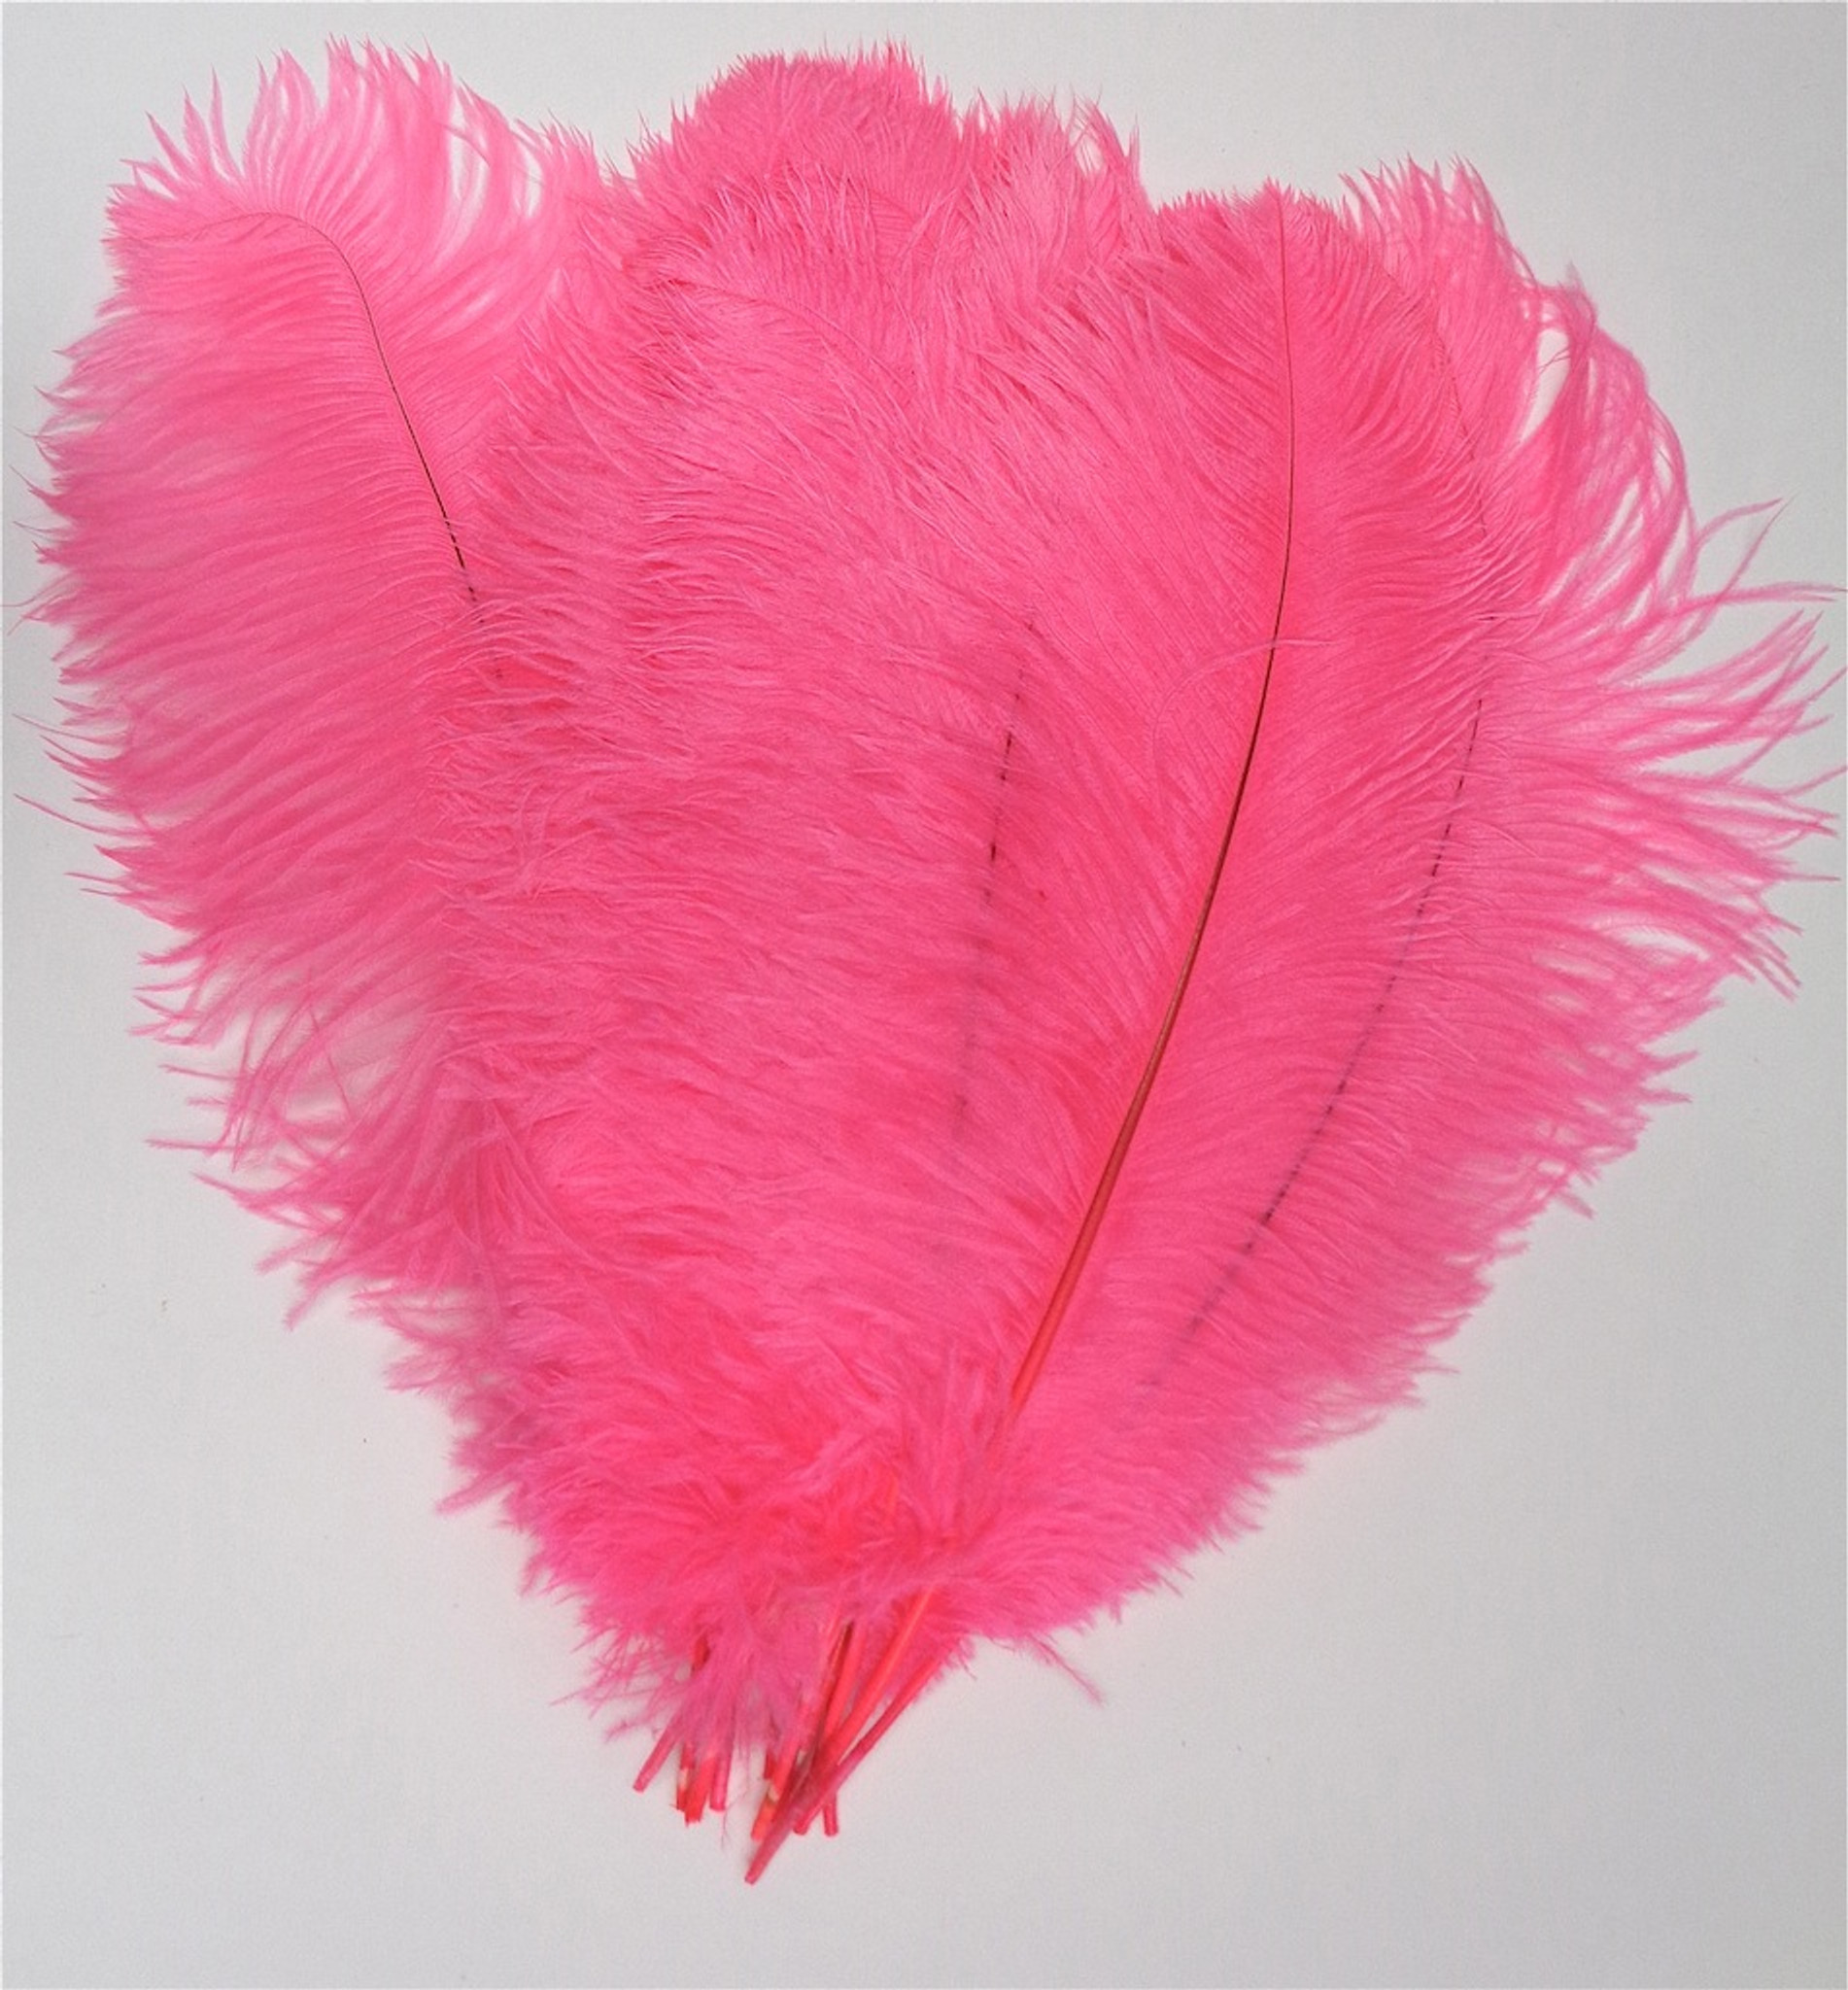 Hot Pink Ostrich Feather 16-20 inch Long per Each